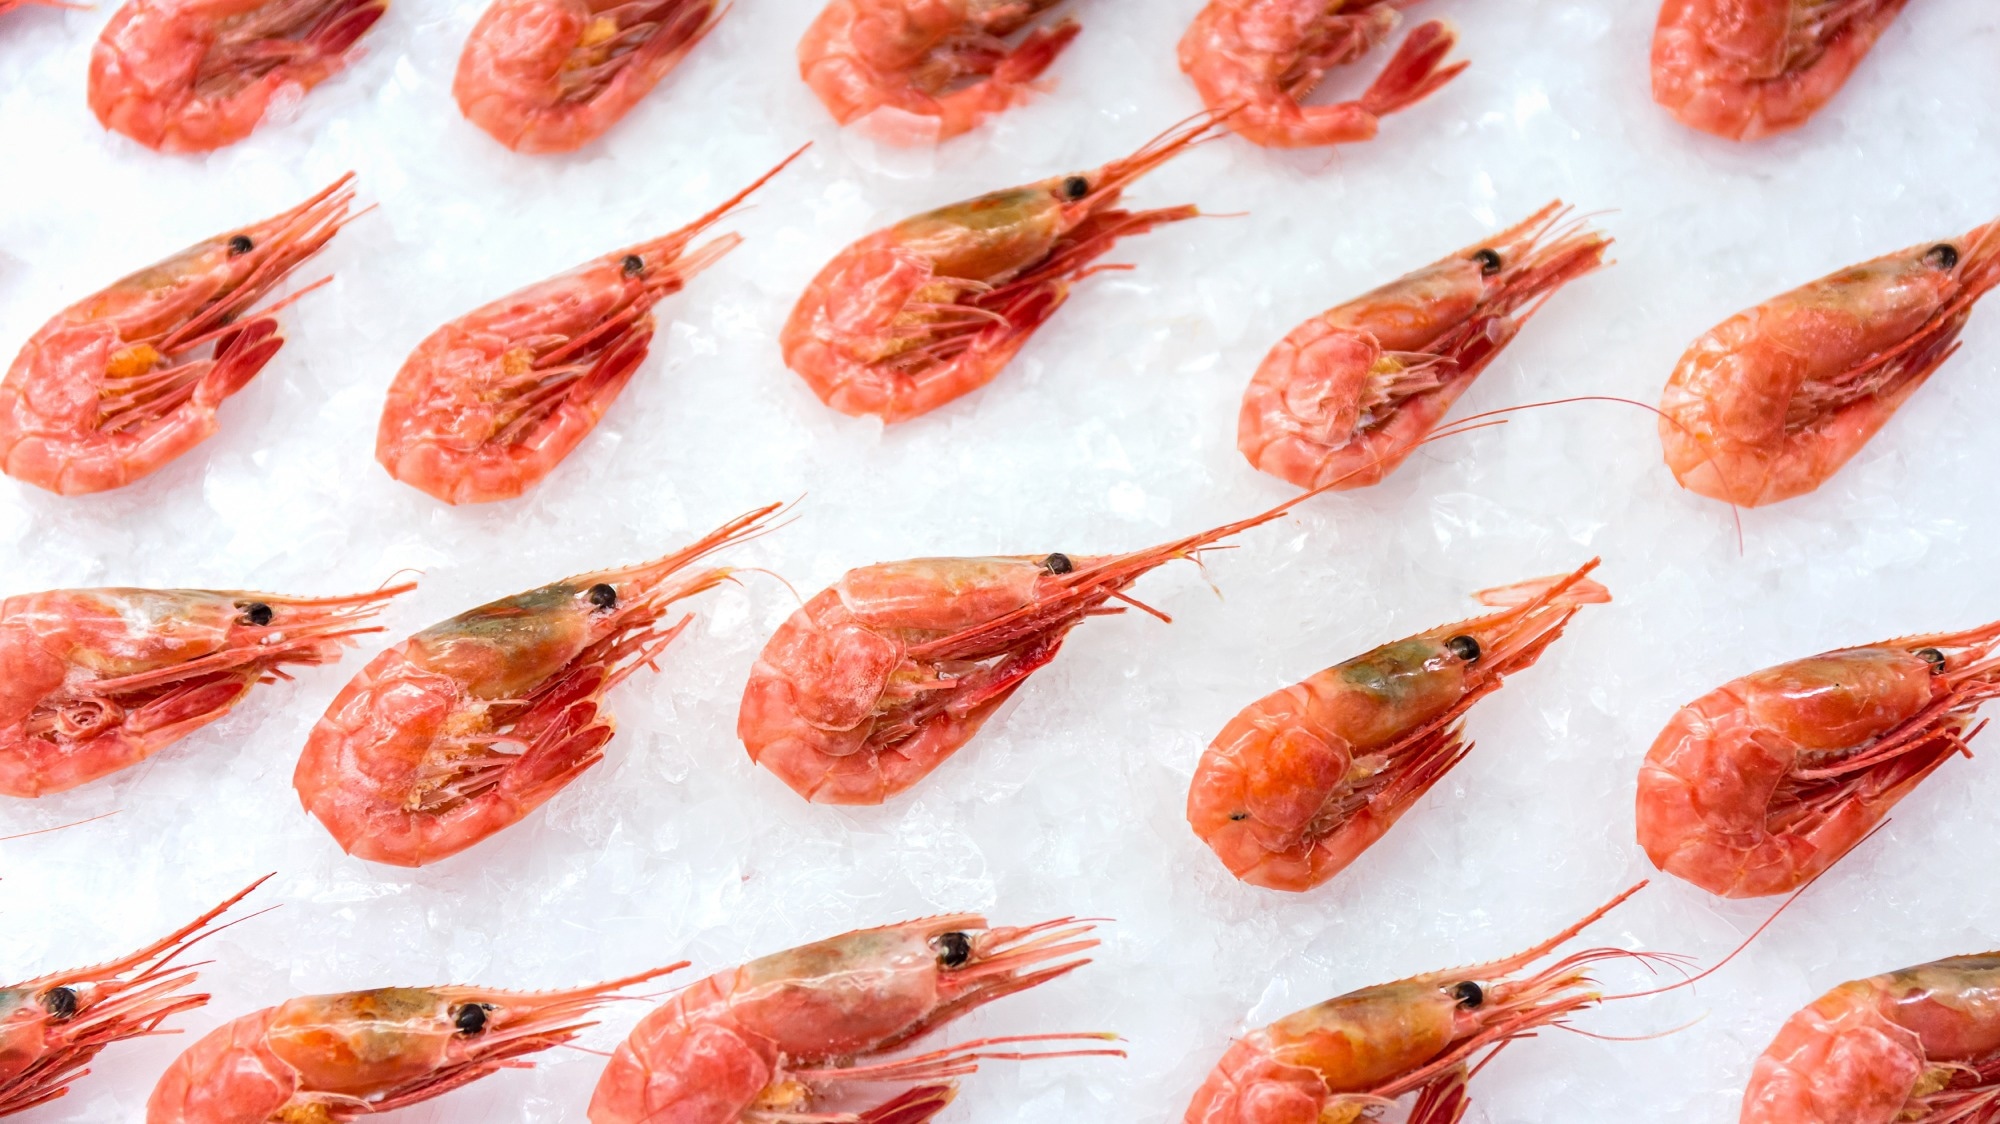 Expert Review: Uterine packing with chitosan-covered tamponade to treat postpartum hemorrhage. Northern prawn Pandalus borealis. Image Credit: Vic Lab / Shutterstock